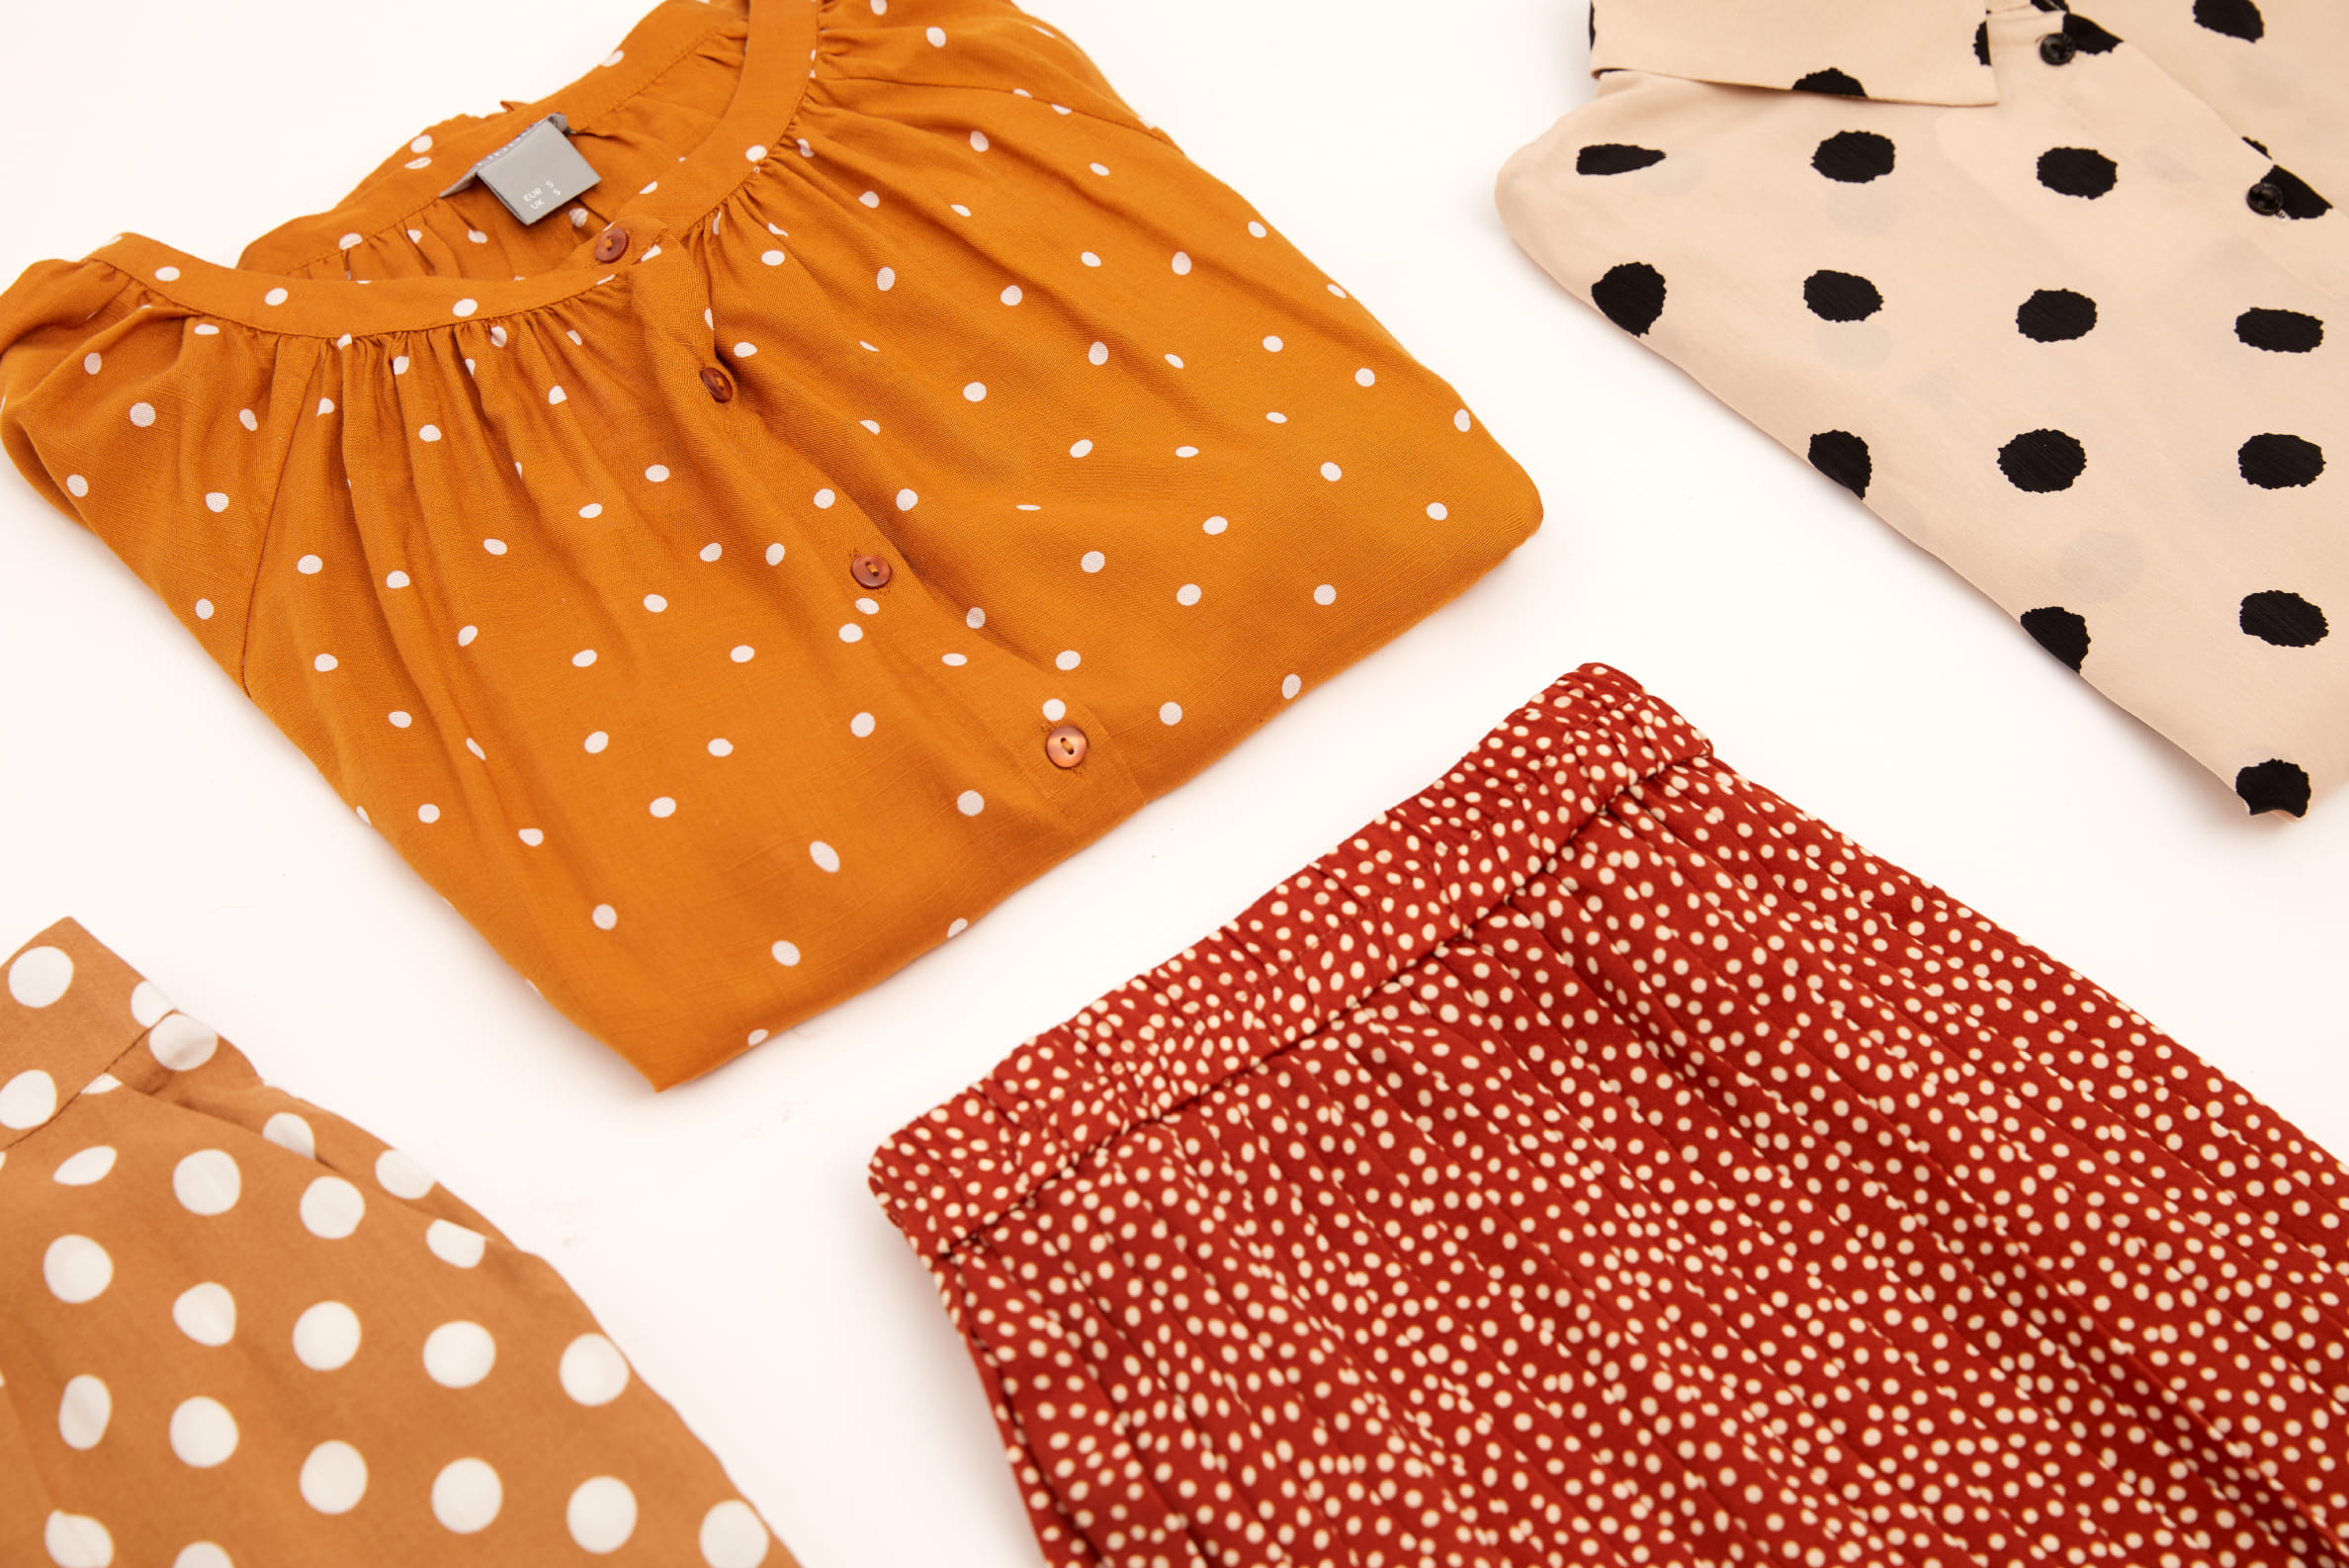 How to Style Polka Dots for Spring/Summer 2019